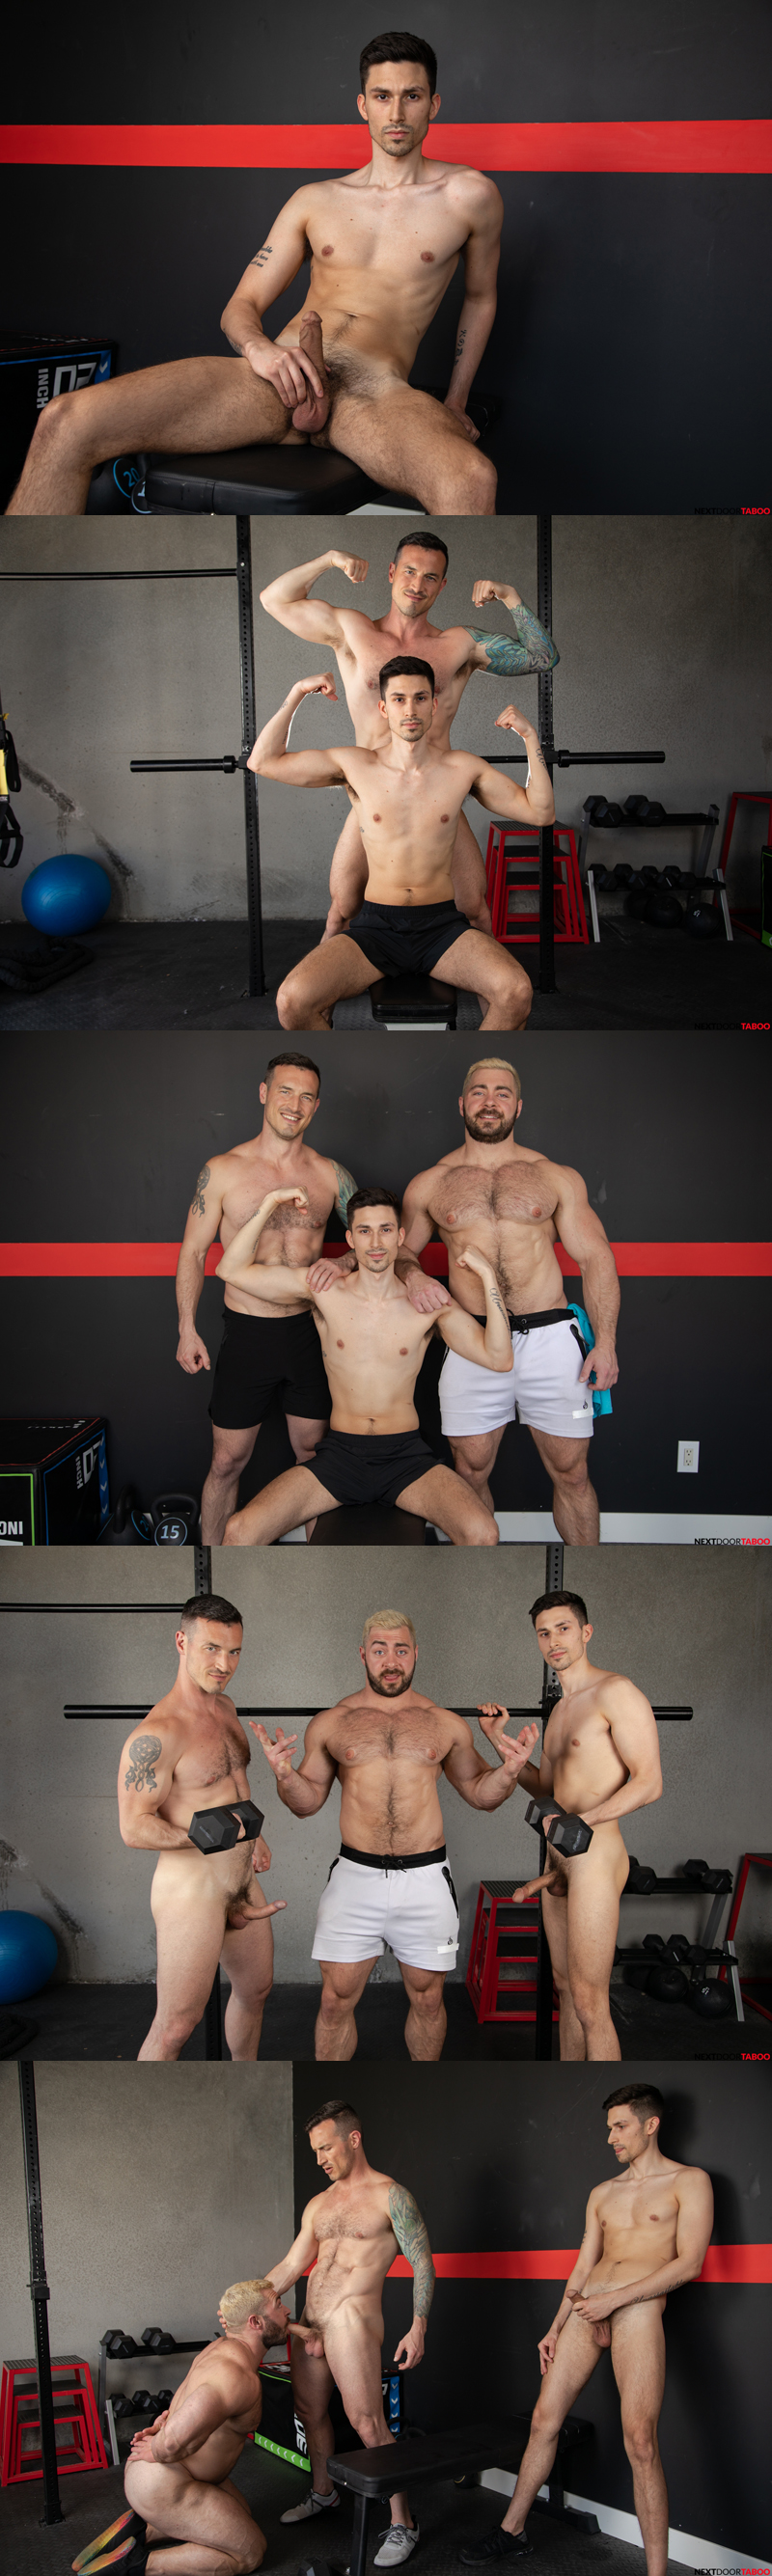 Let's Fuck The Trainer (Carter Woods and Grant Ducati Flip-Fuck) at Next Door TABOO